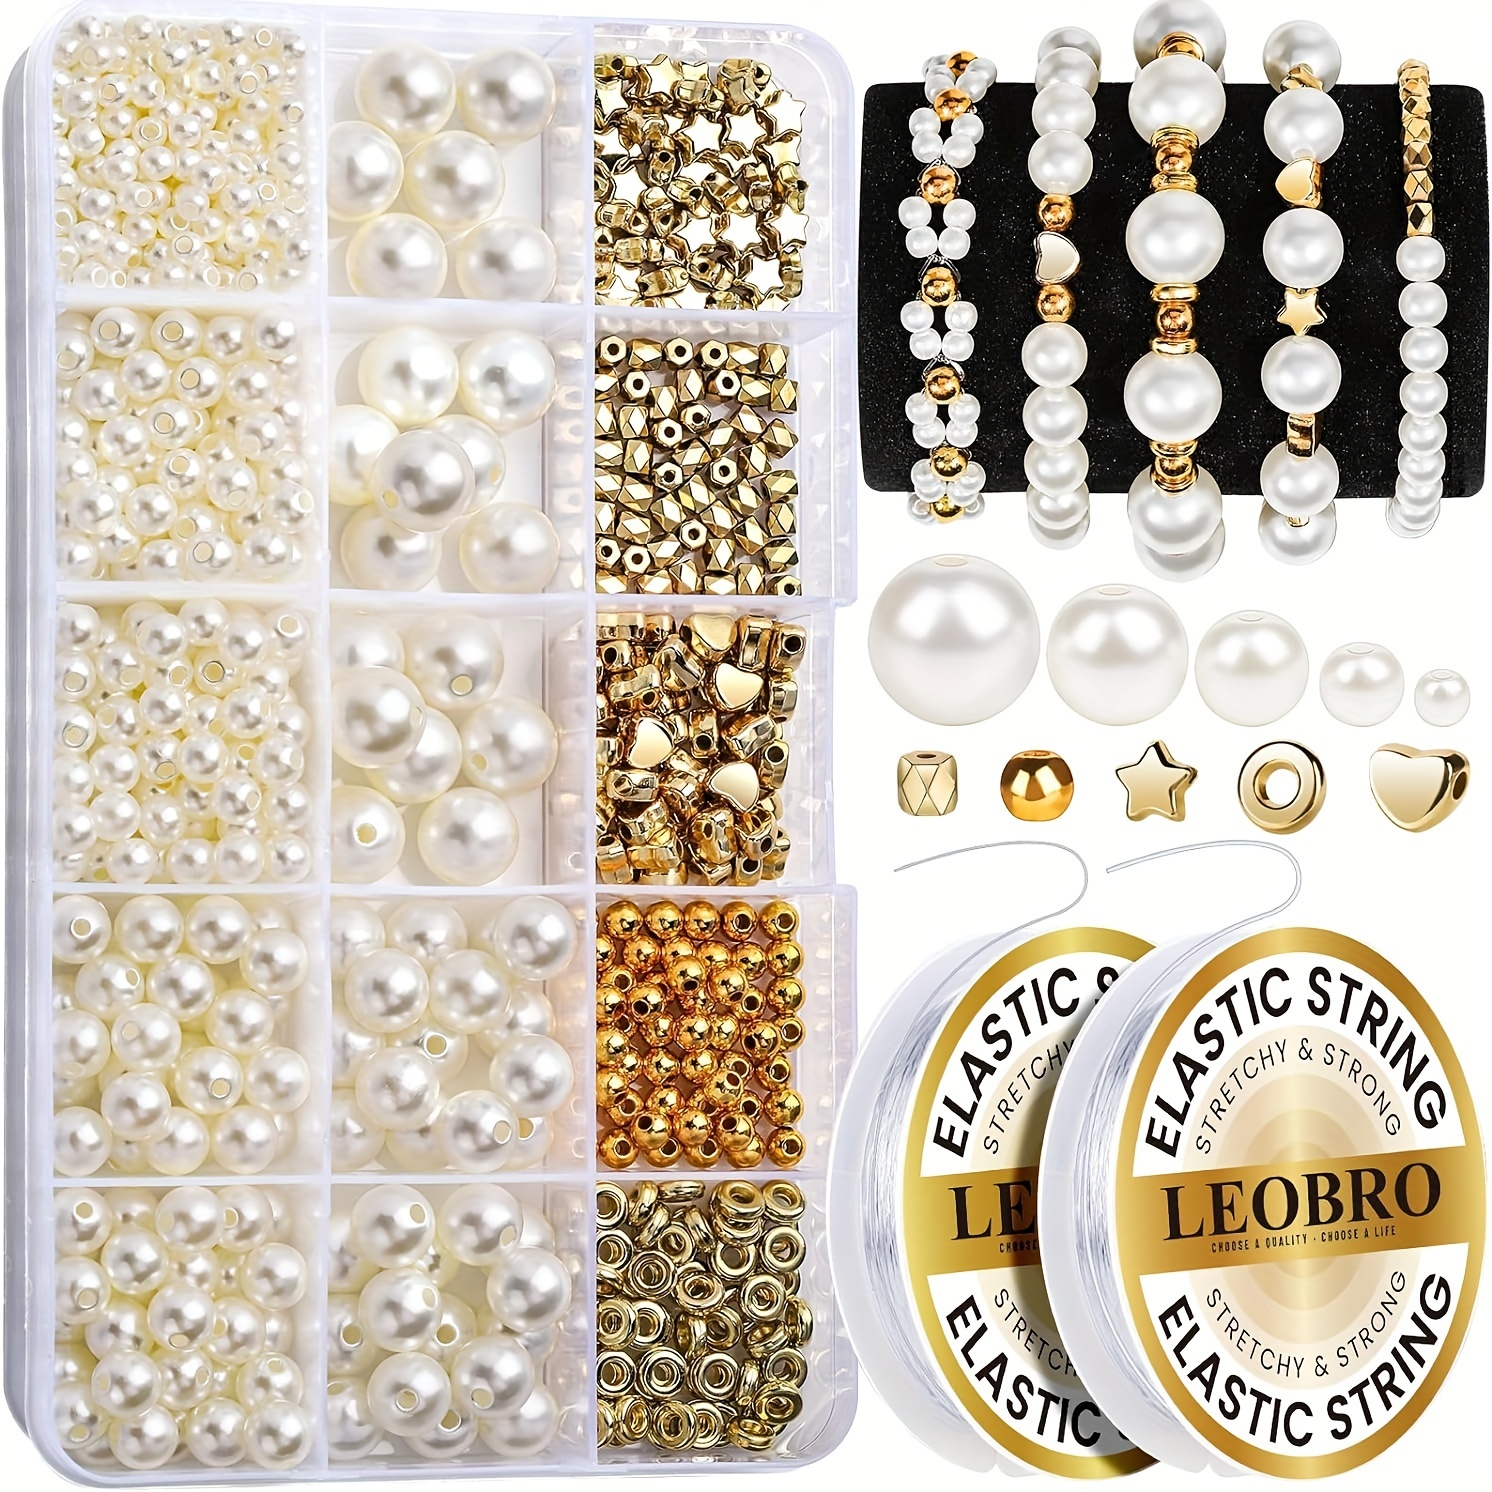 

720pcs Imitation Pearls And Golden Beads For Jewelry Making Diy Elegant Bracelet Necklace Friendship Adult Handmade Craft Supplies